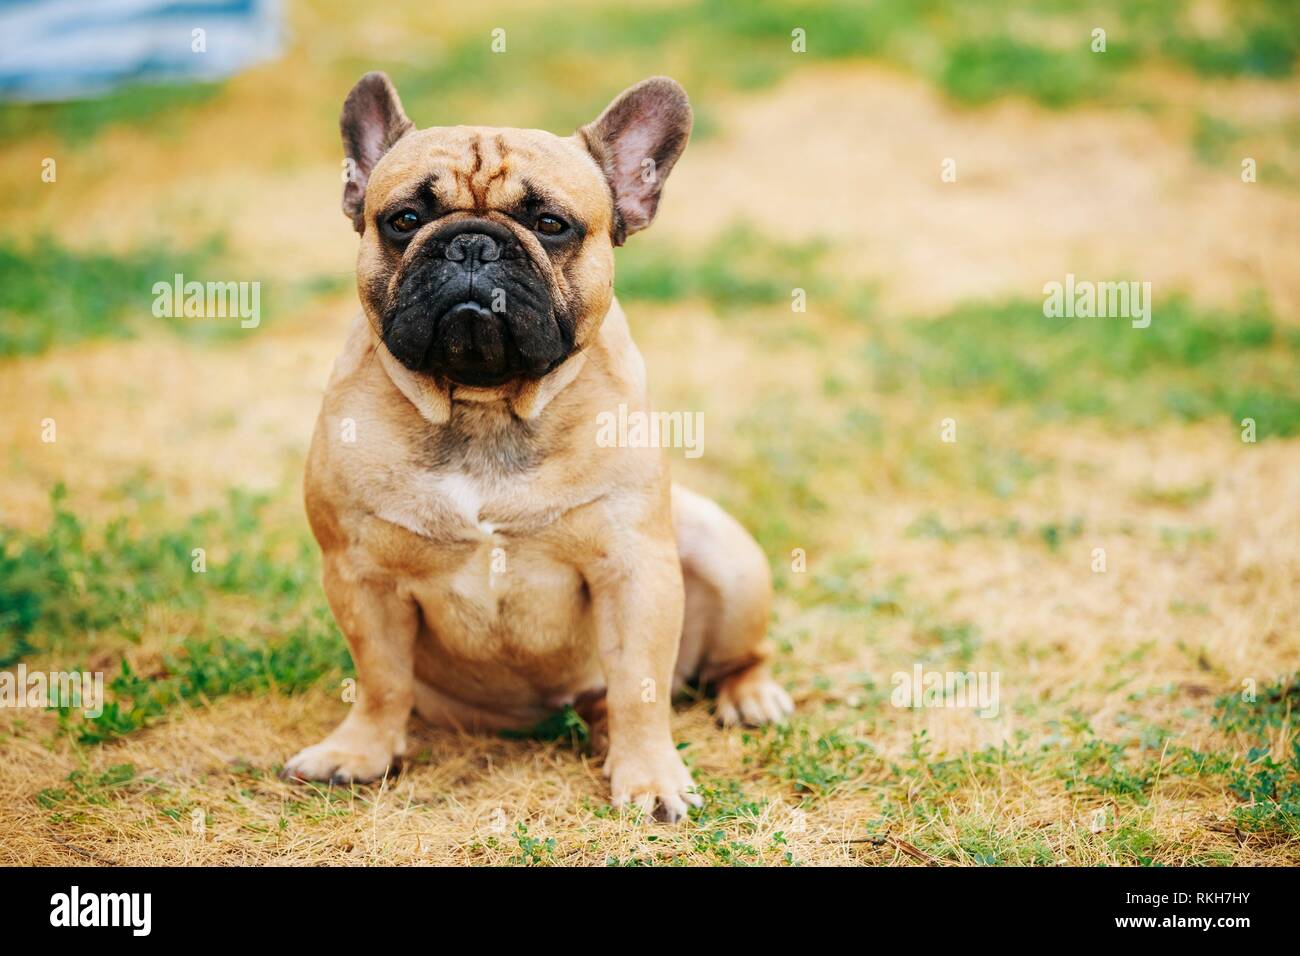 French Bulldog Dog In Park Outdoor. Stock Photo